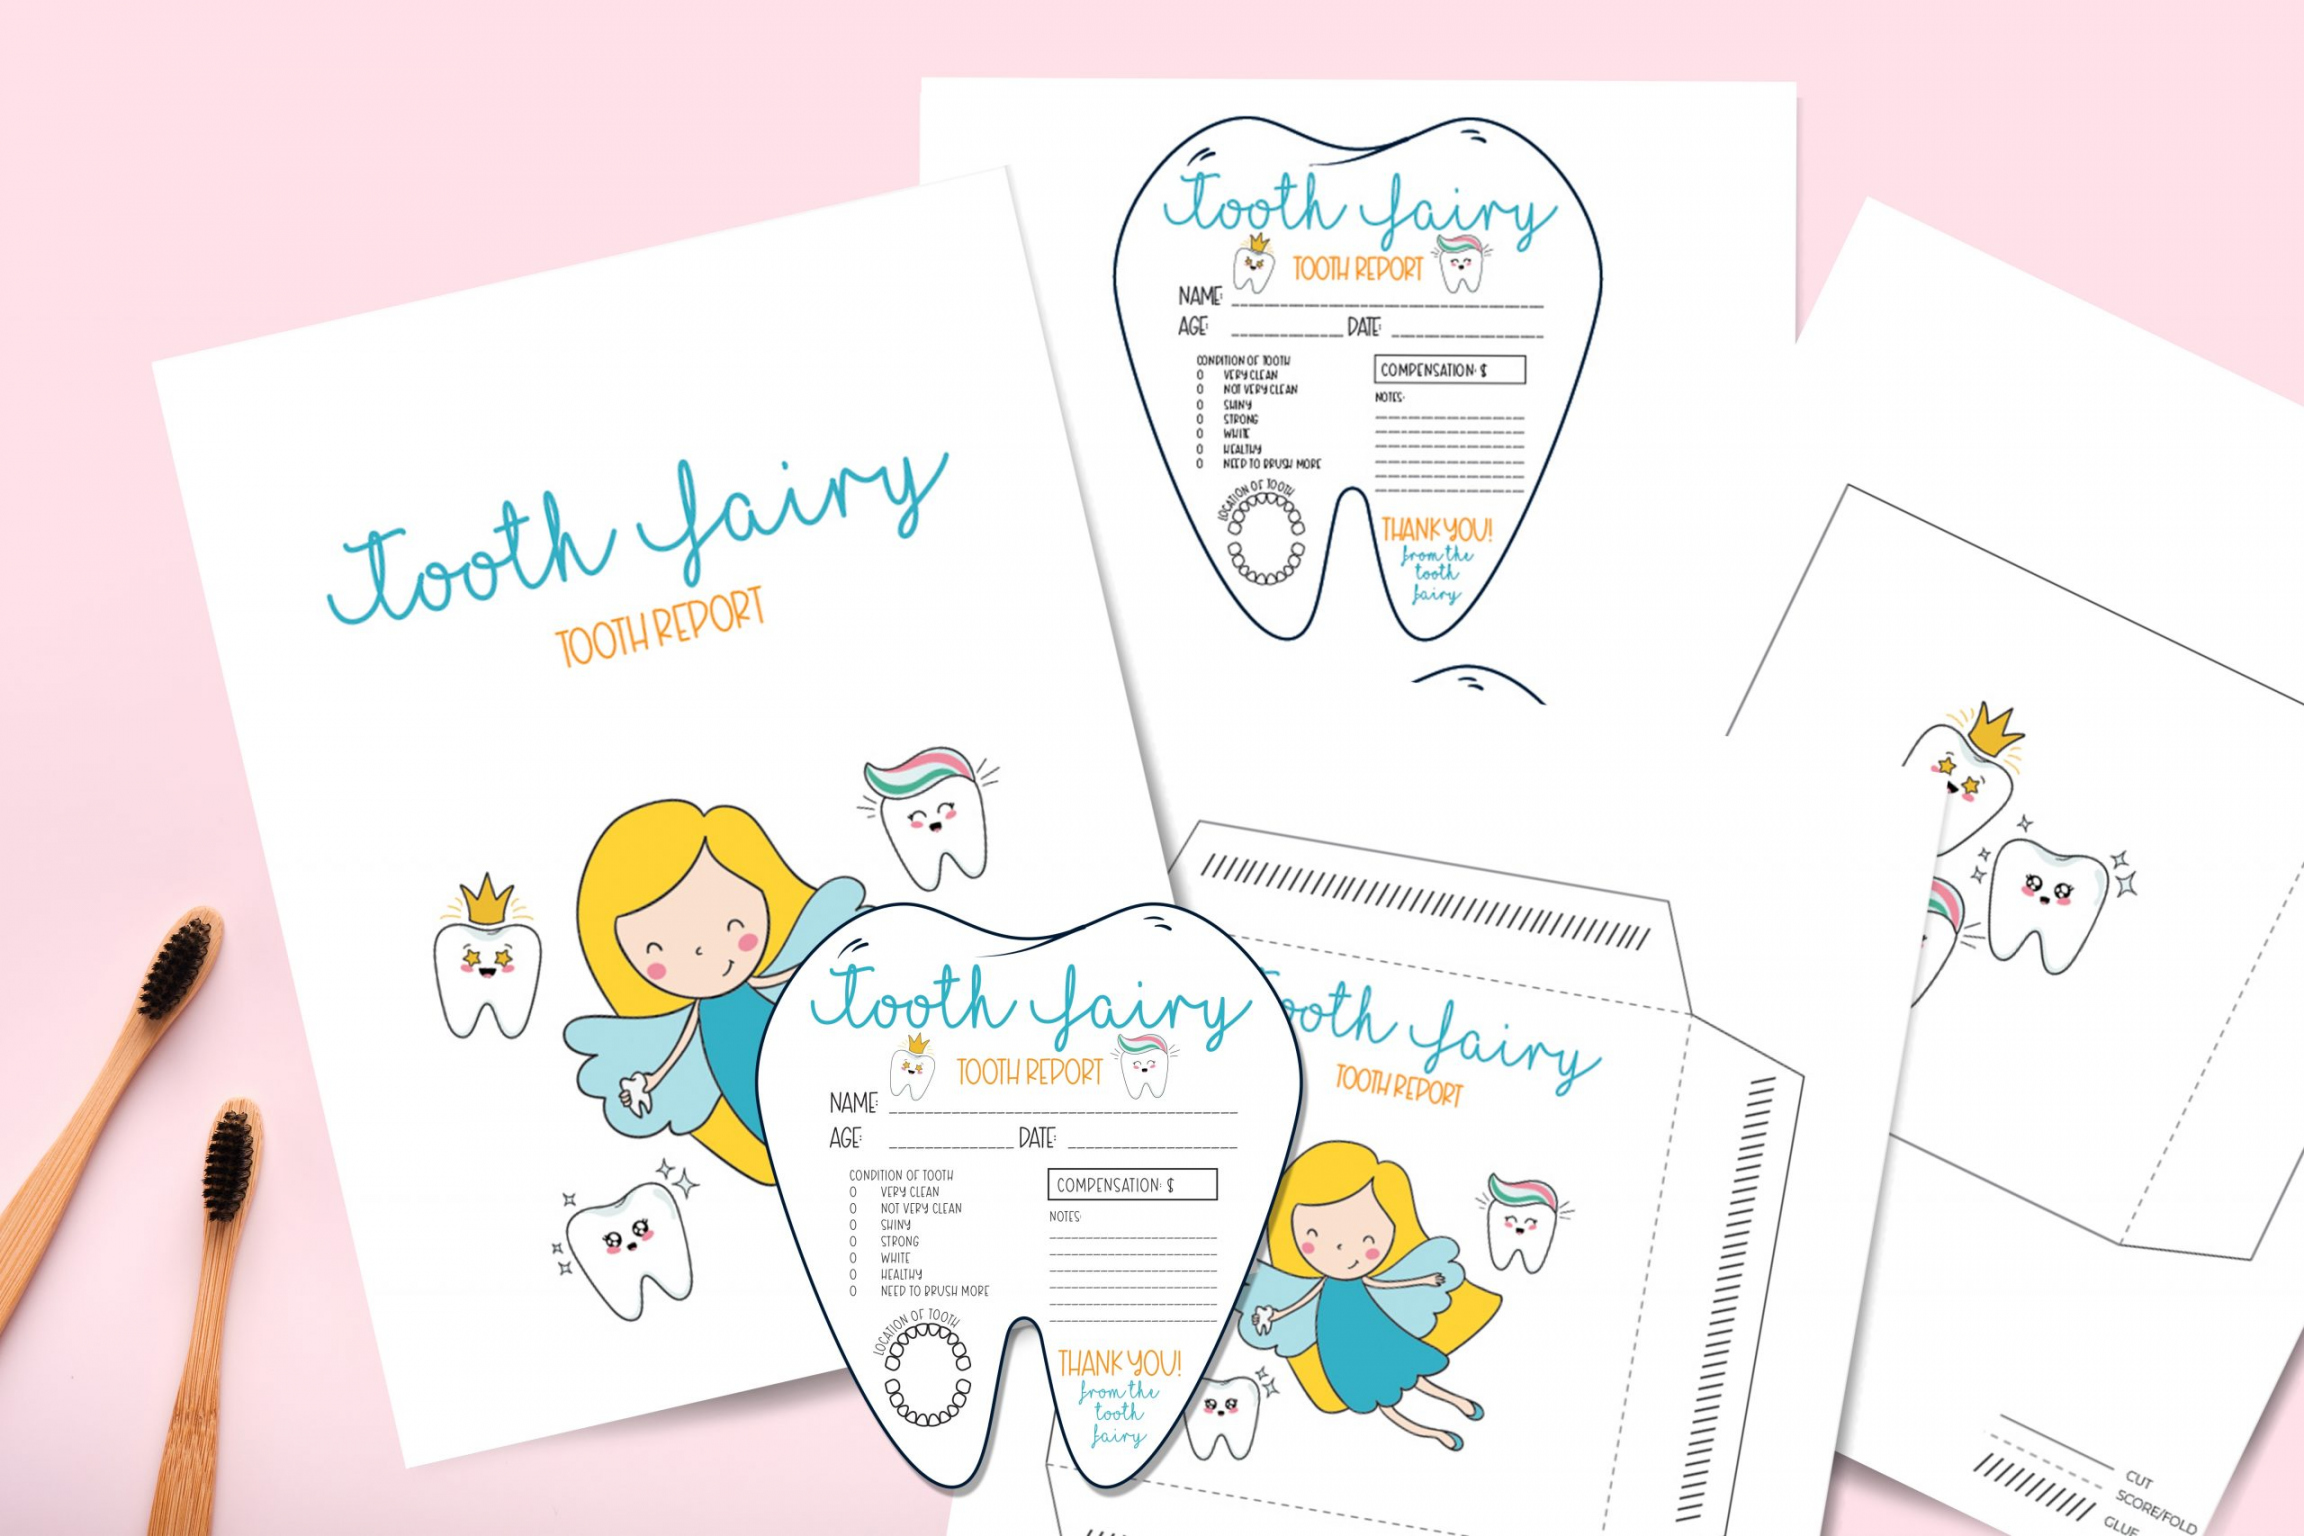 FREE Tooth Fairy Printable Note & Receipt For Extra Magic - FREE Printables - Tooth Fairy Free Printable